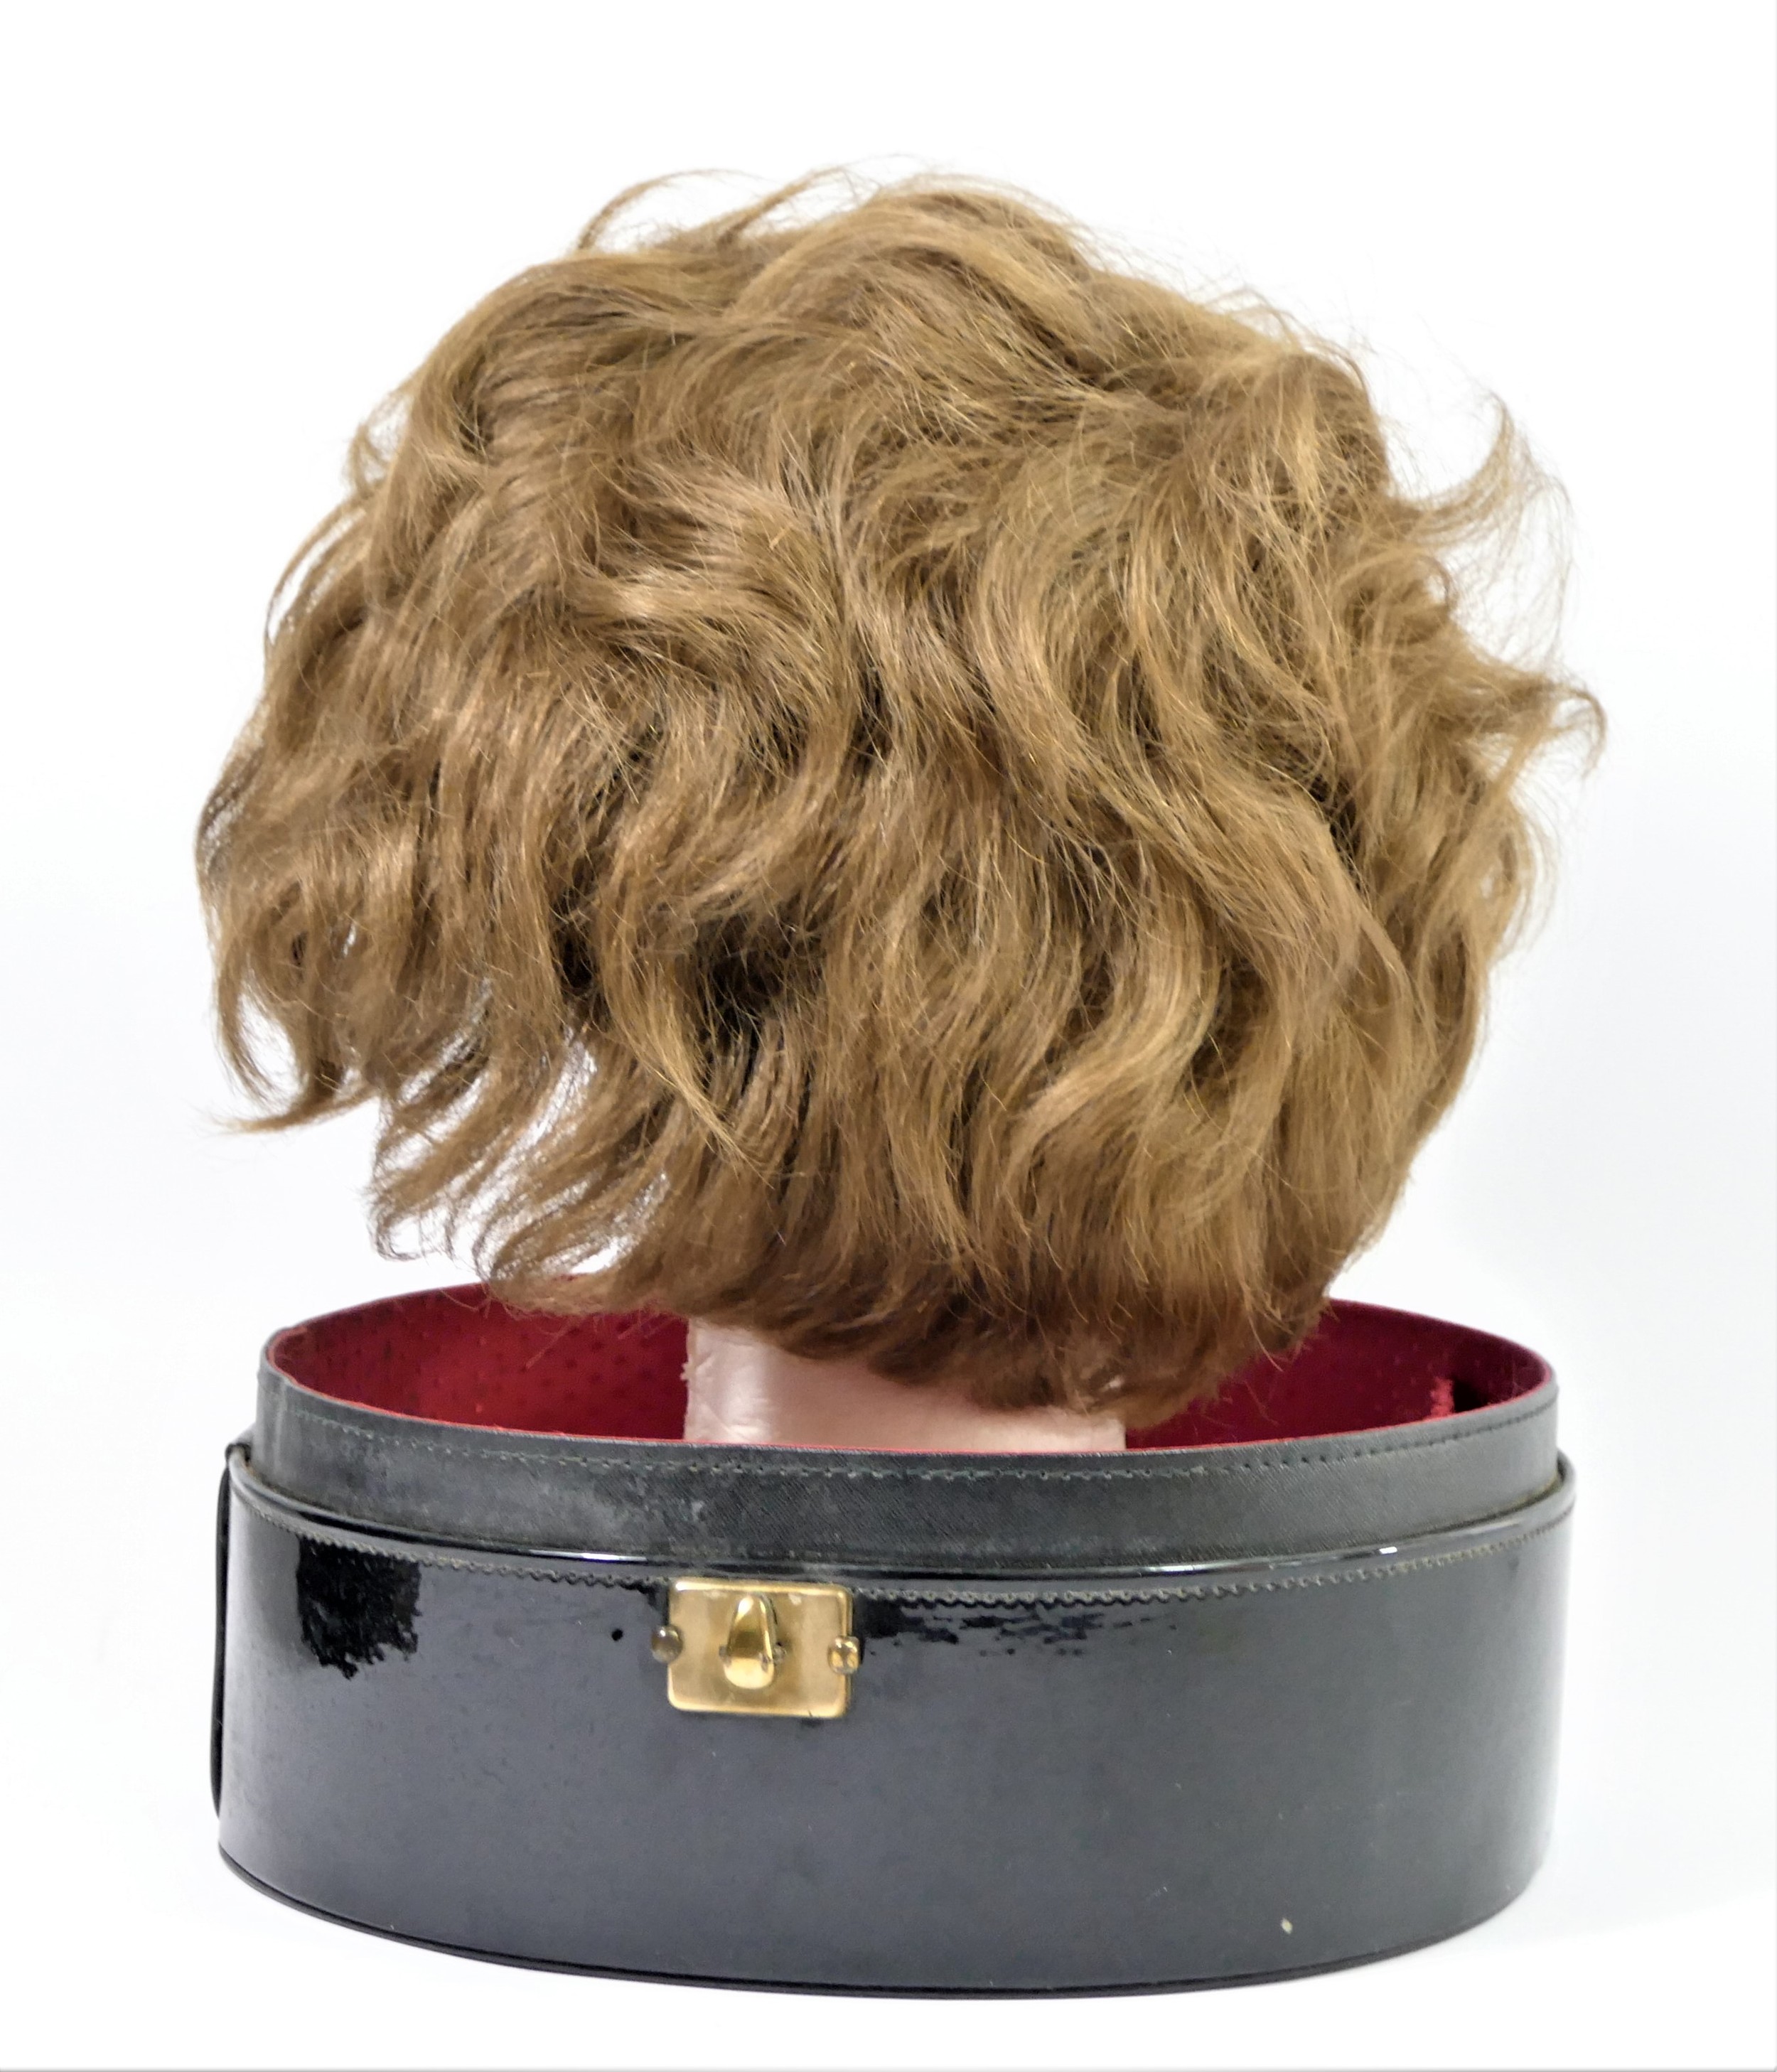 Short, mid brown 1960's style wig in a black patent travel case , 35 x 27cm. - Image 2 of 4